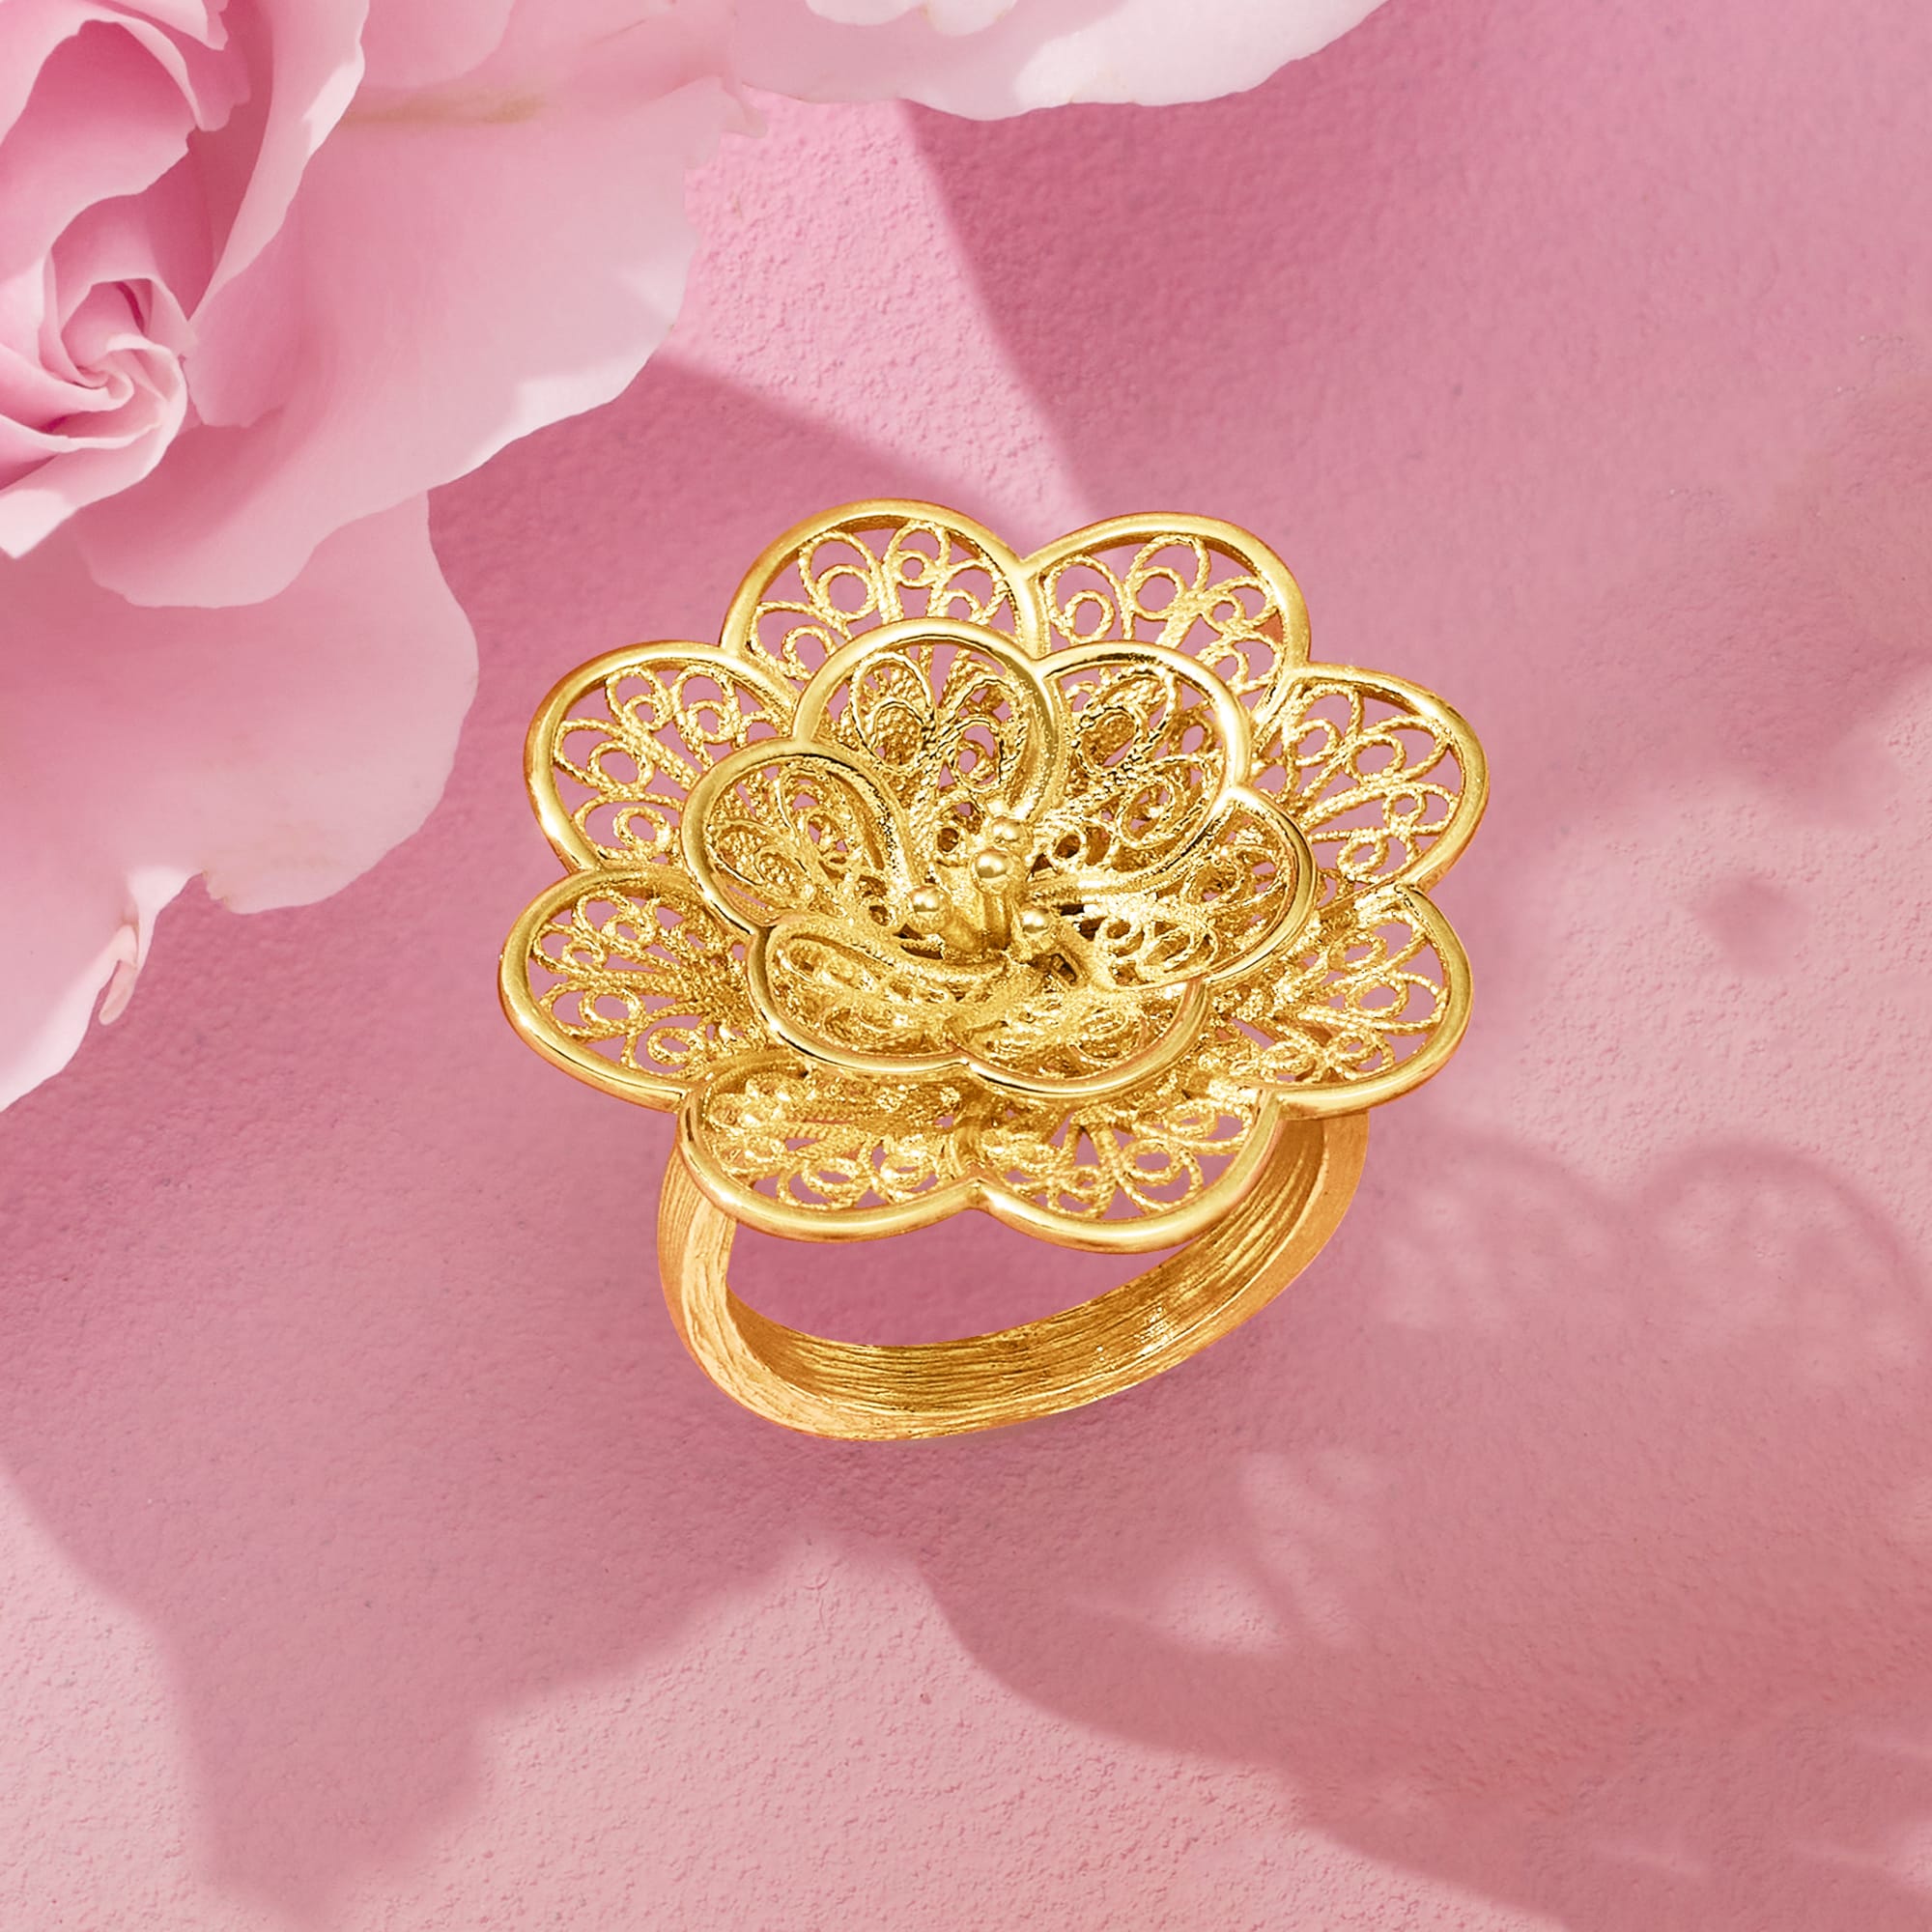 Attractive Mesh Flower 22K Gold Ring | 22k gold ring, Gold rings, Gold  beauty